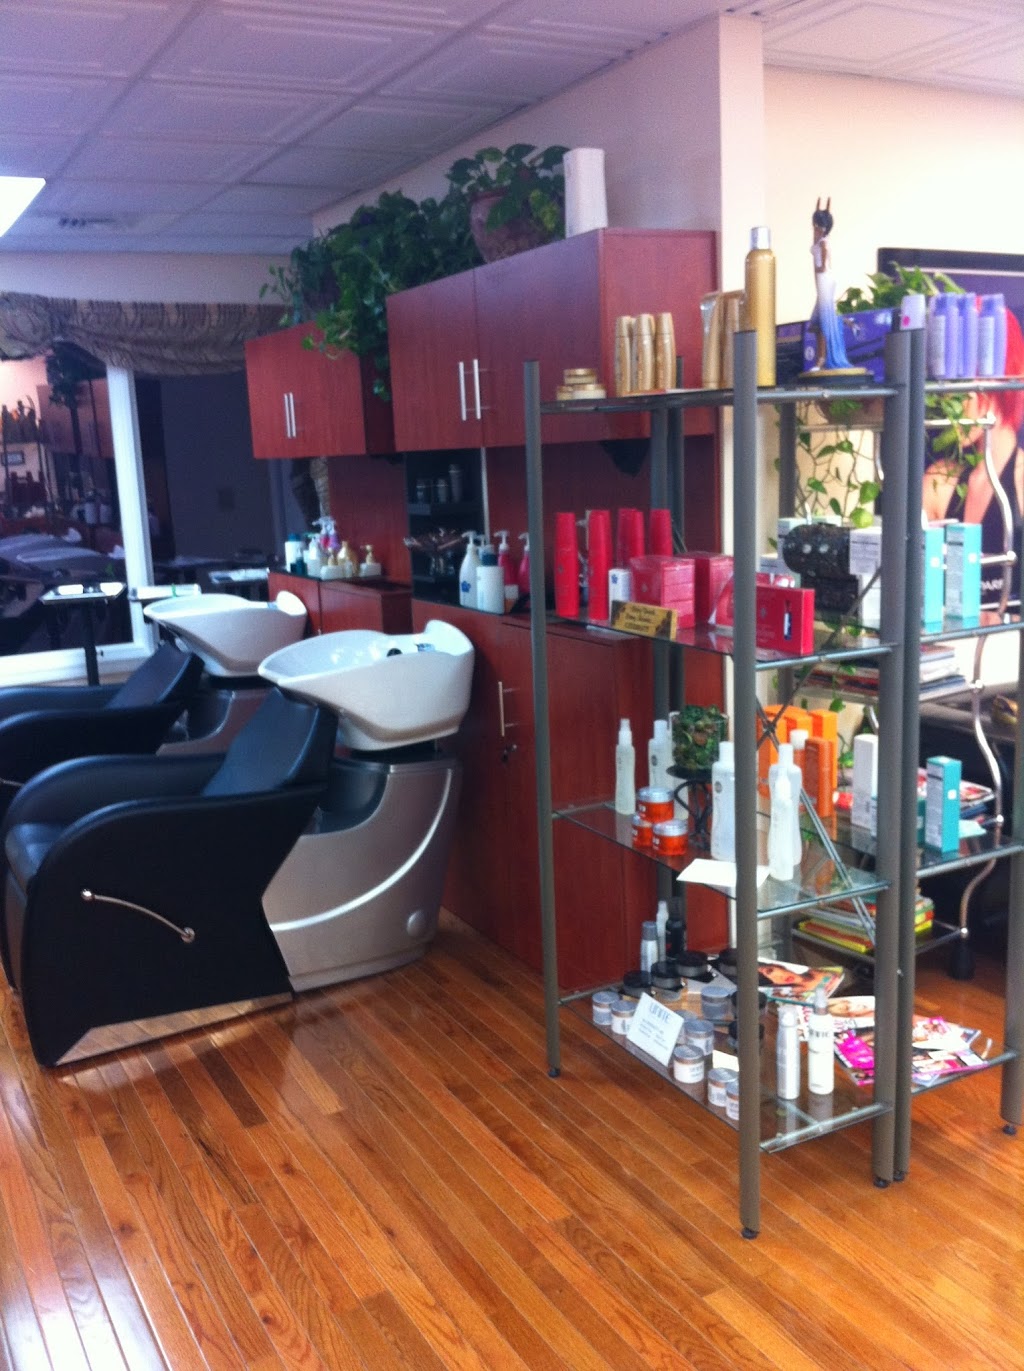 Hairs Talent / GinaCurl | 30 Main St, East Haven, CT 06512 | Phone: (203) 466-1246